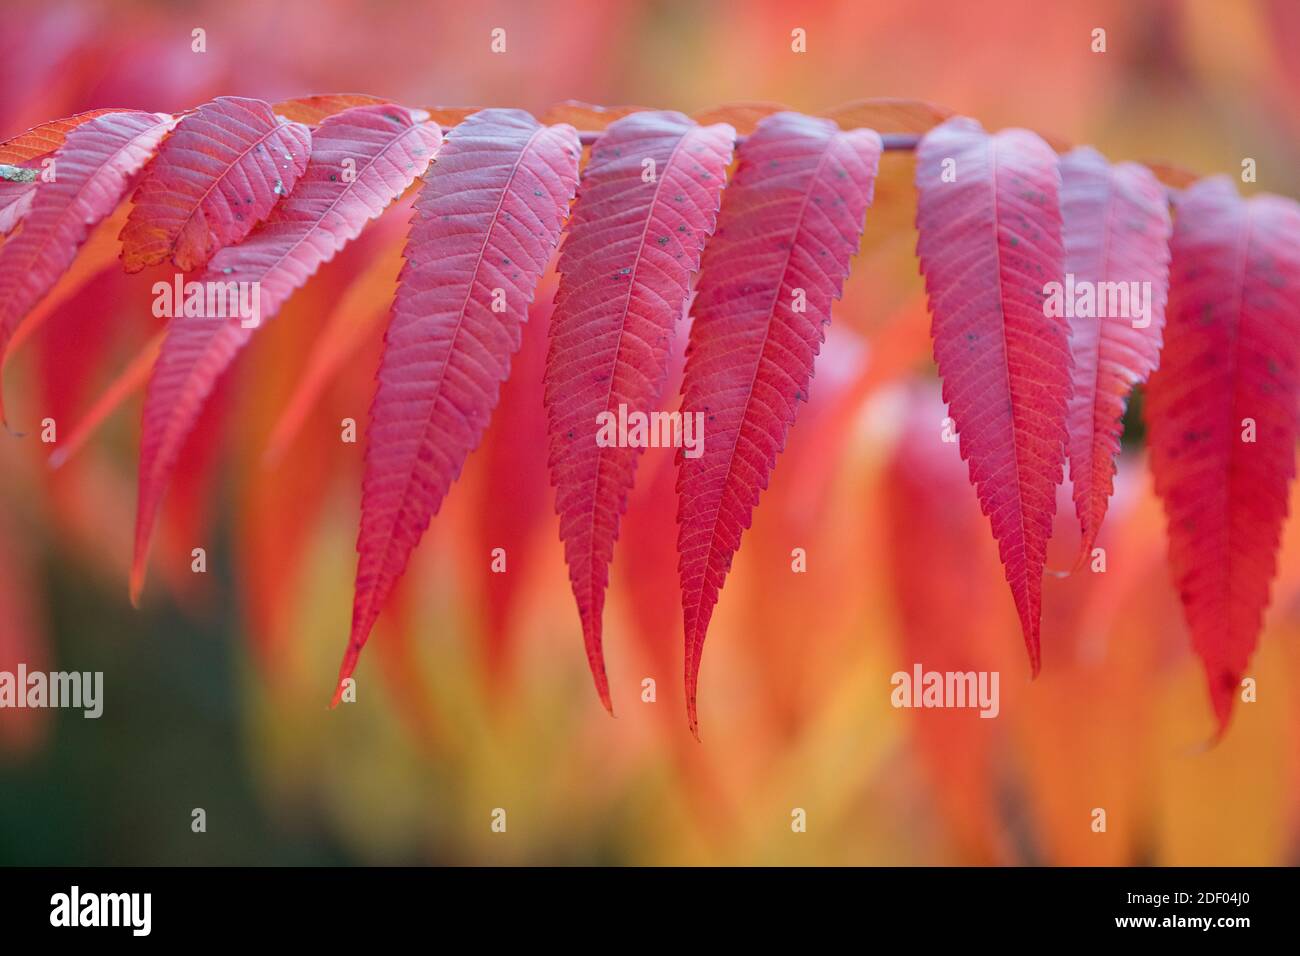 Red, orange and yellow colors appear on Sumac leaves in autumn. Stock Photo